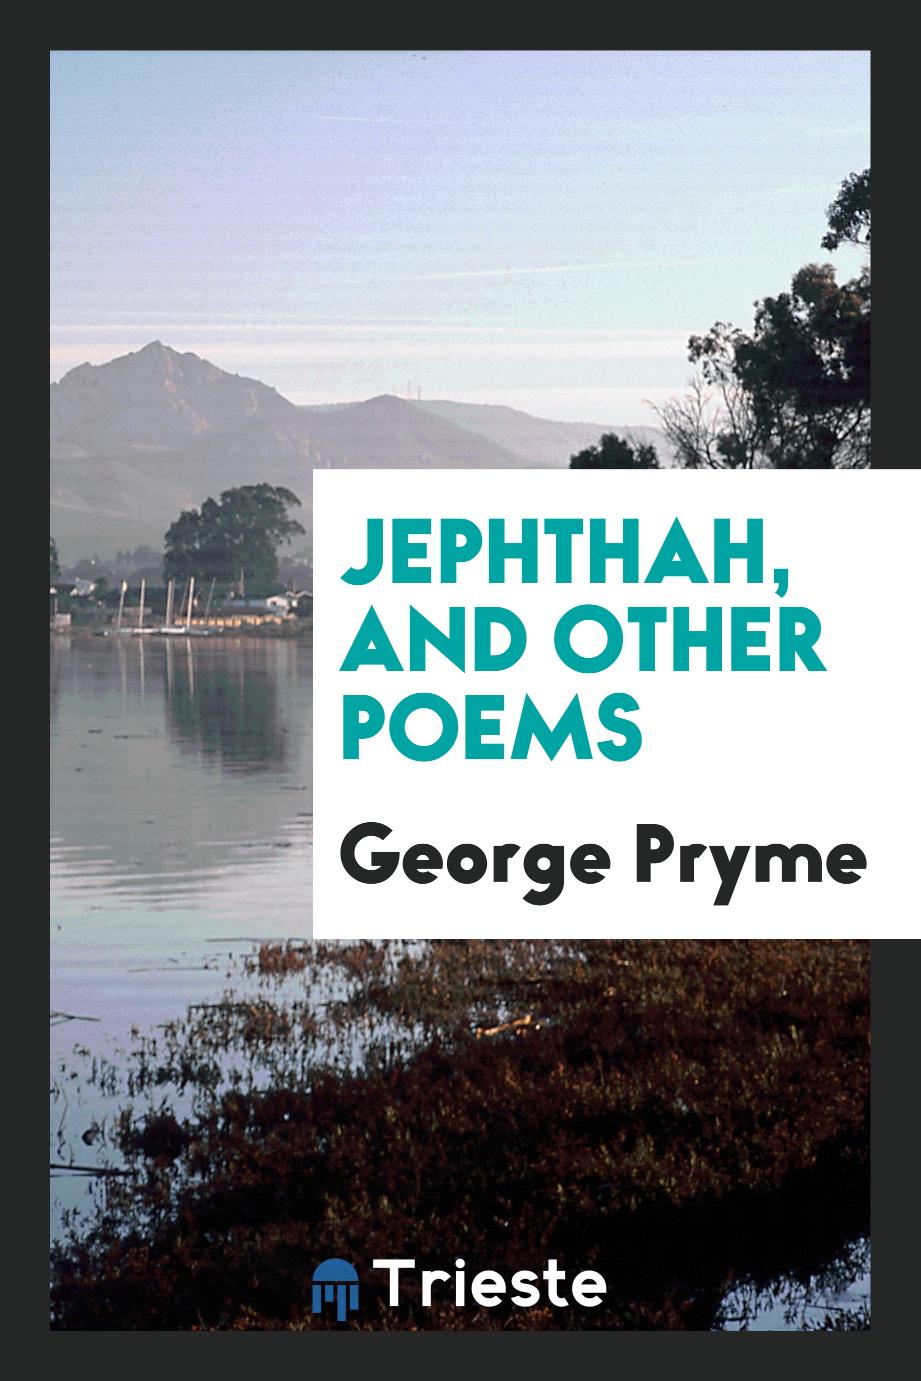 Jephthah, and other poems